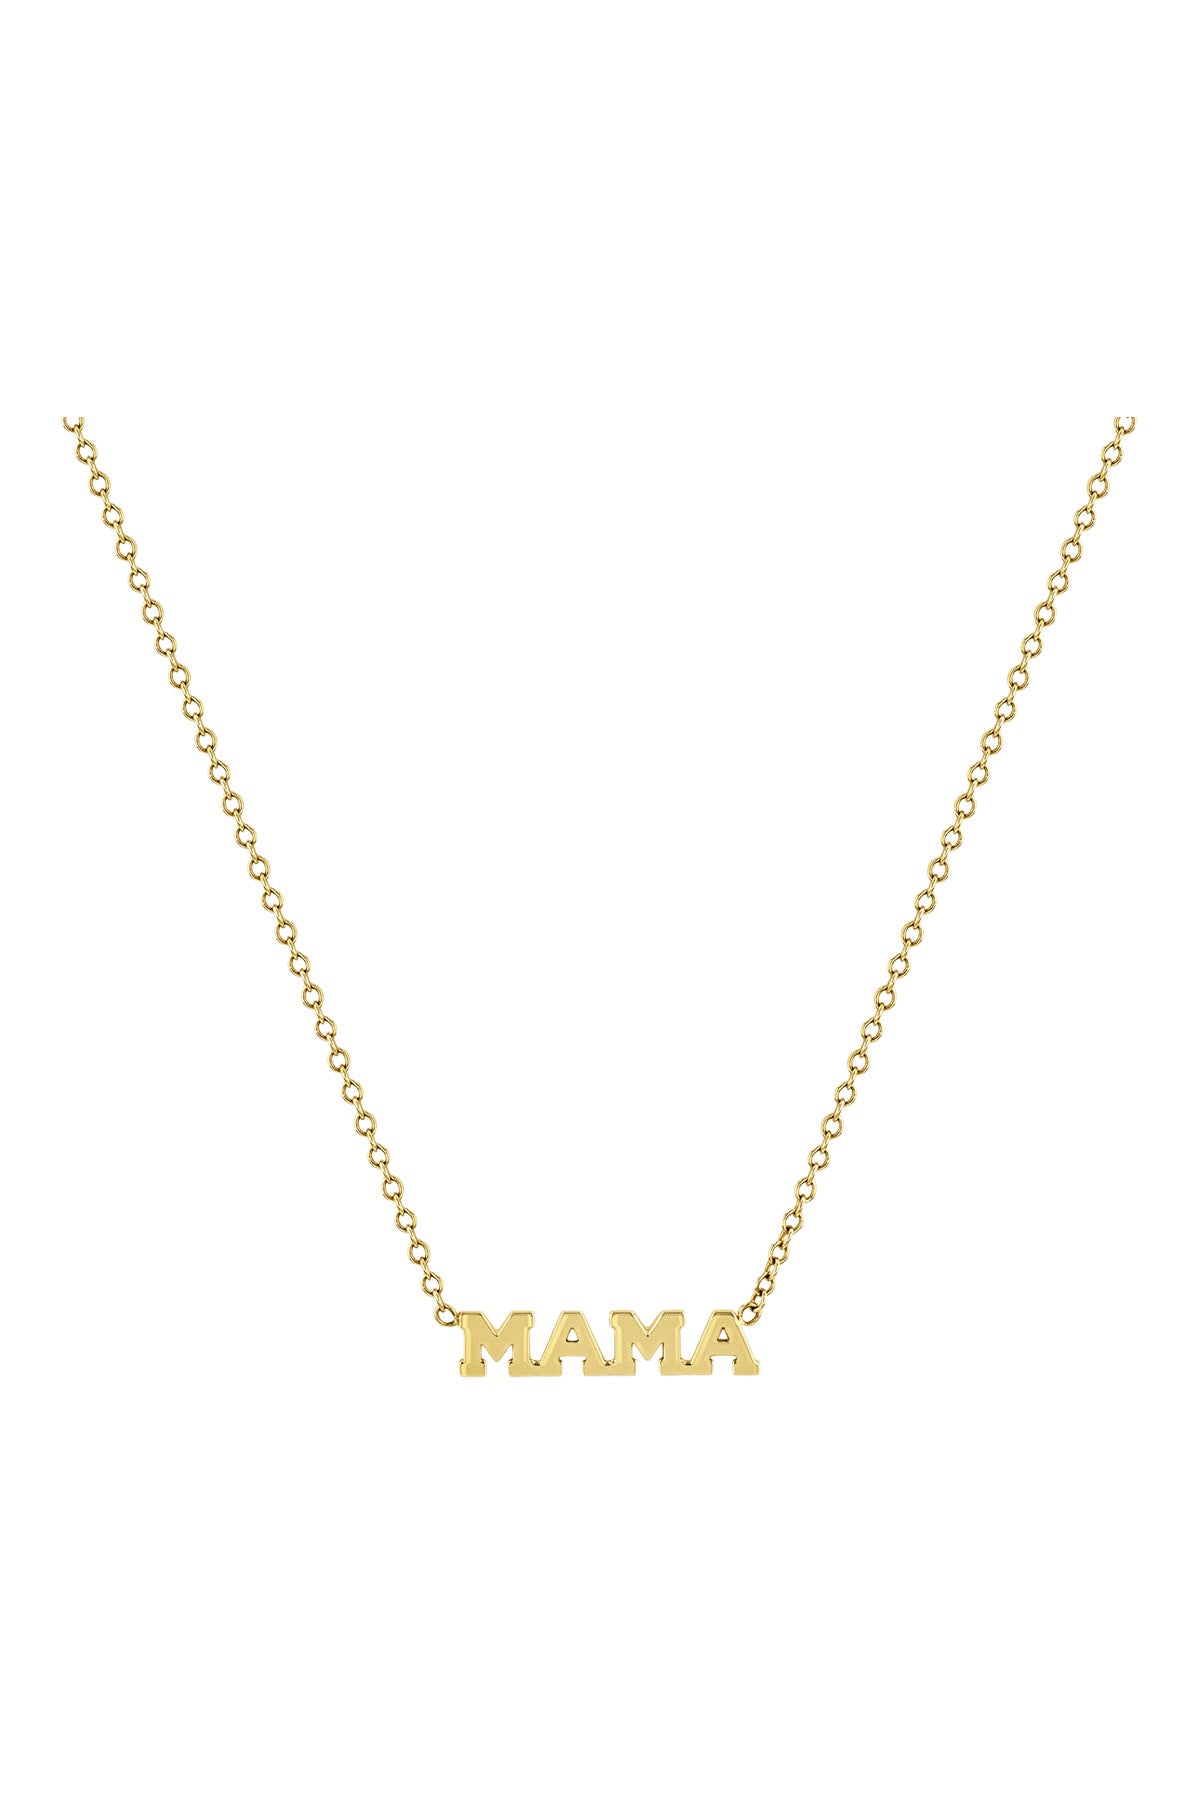 Zoe Chicco Itty Bitty Mama Necklace in 14k Yellow Gold